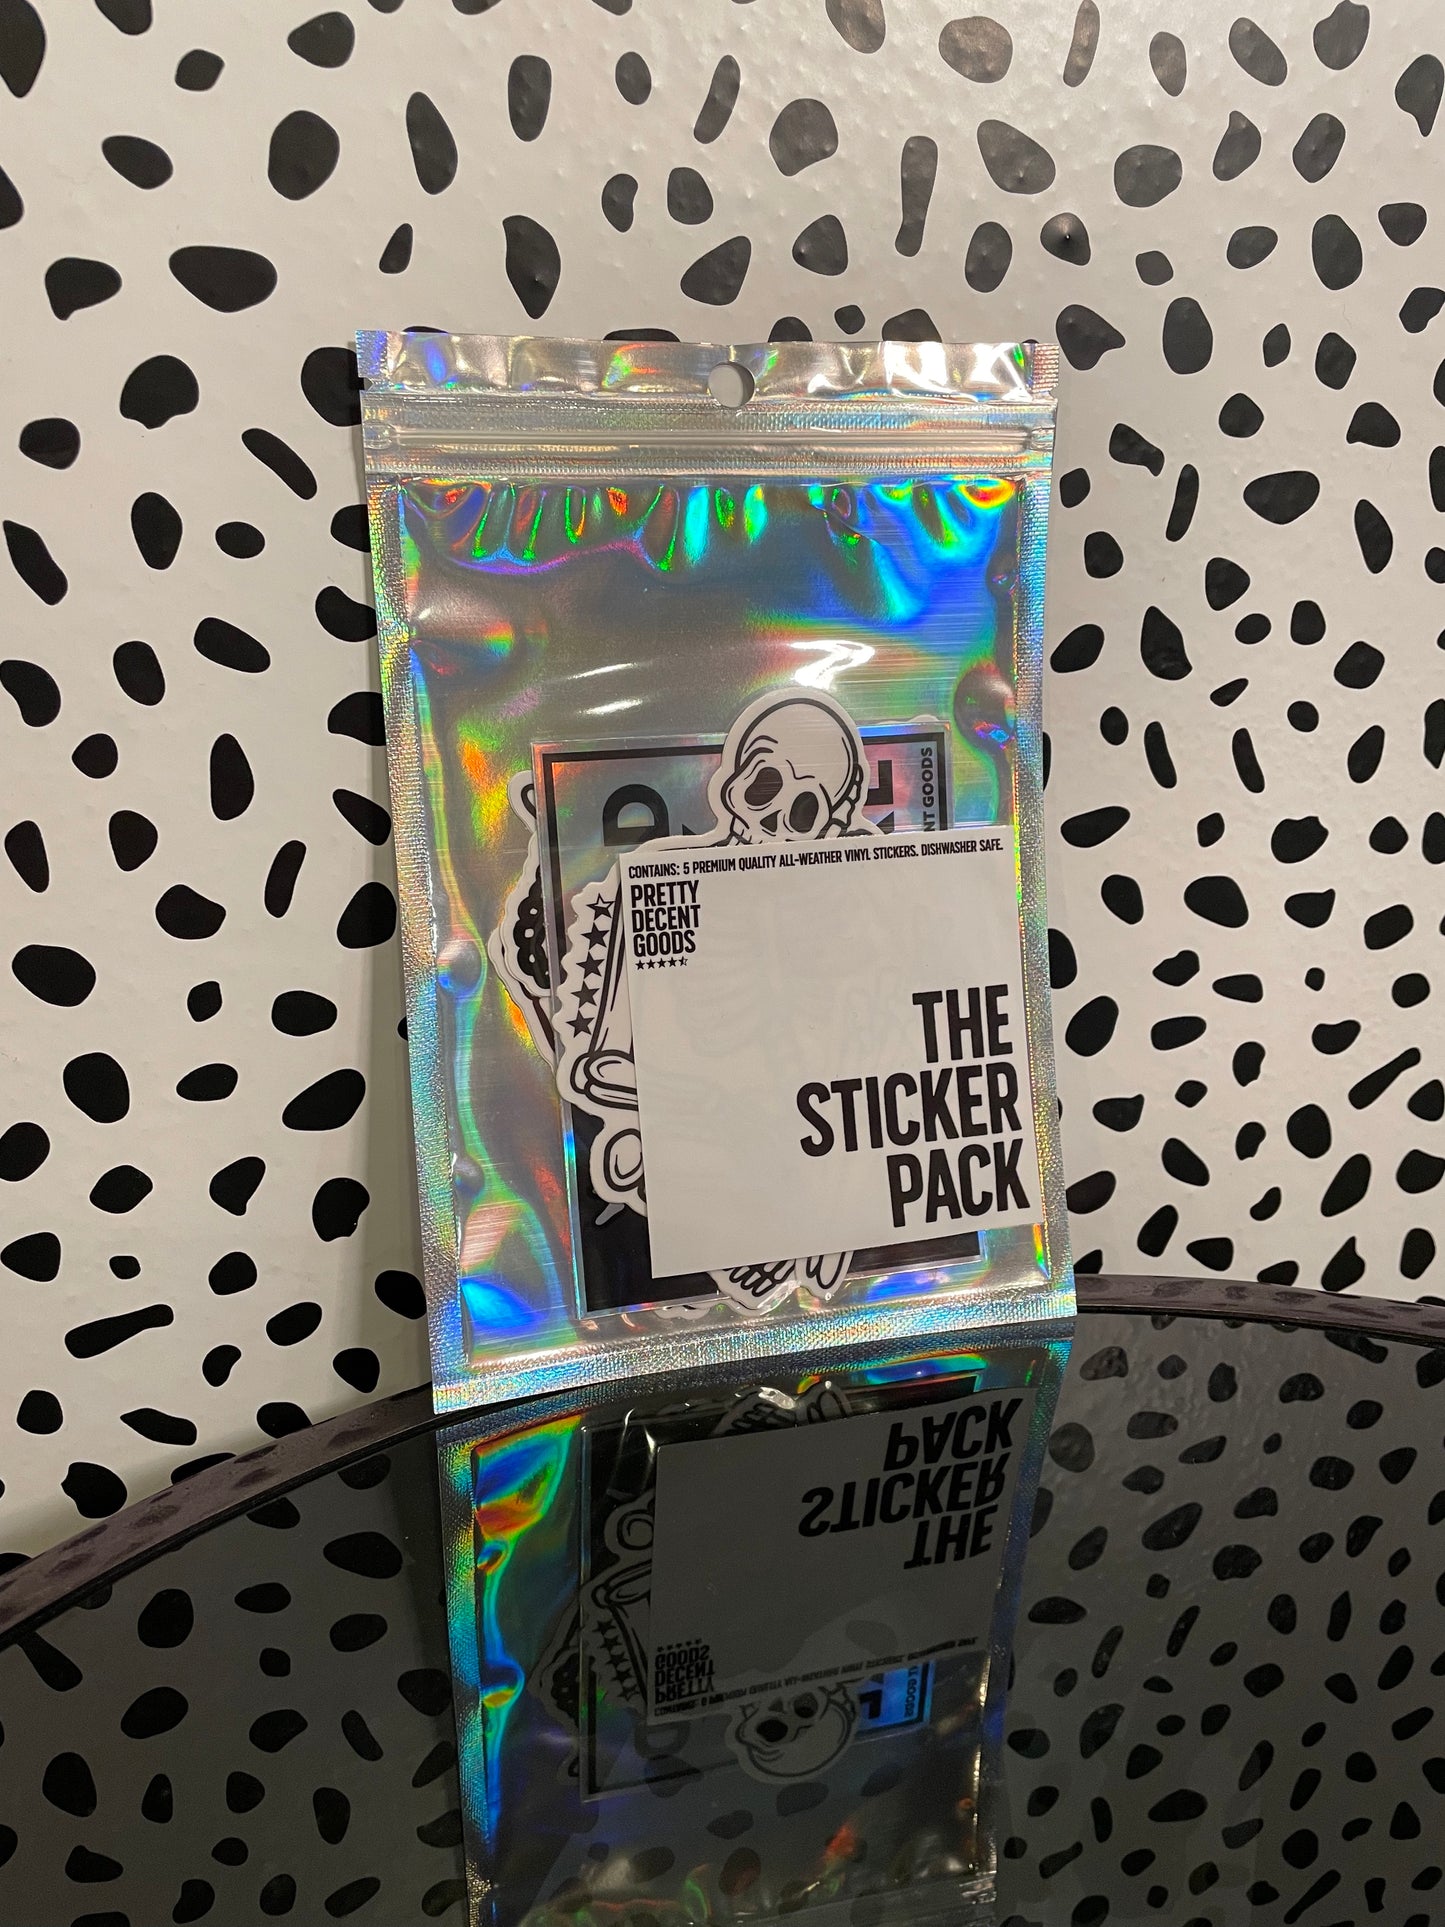 The Sticker Pack